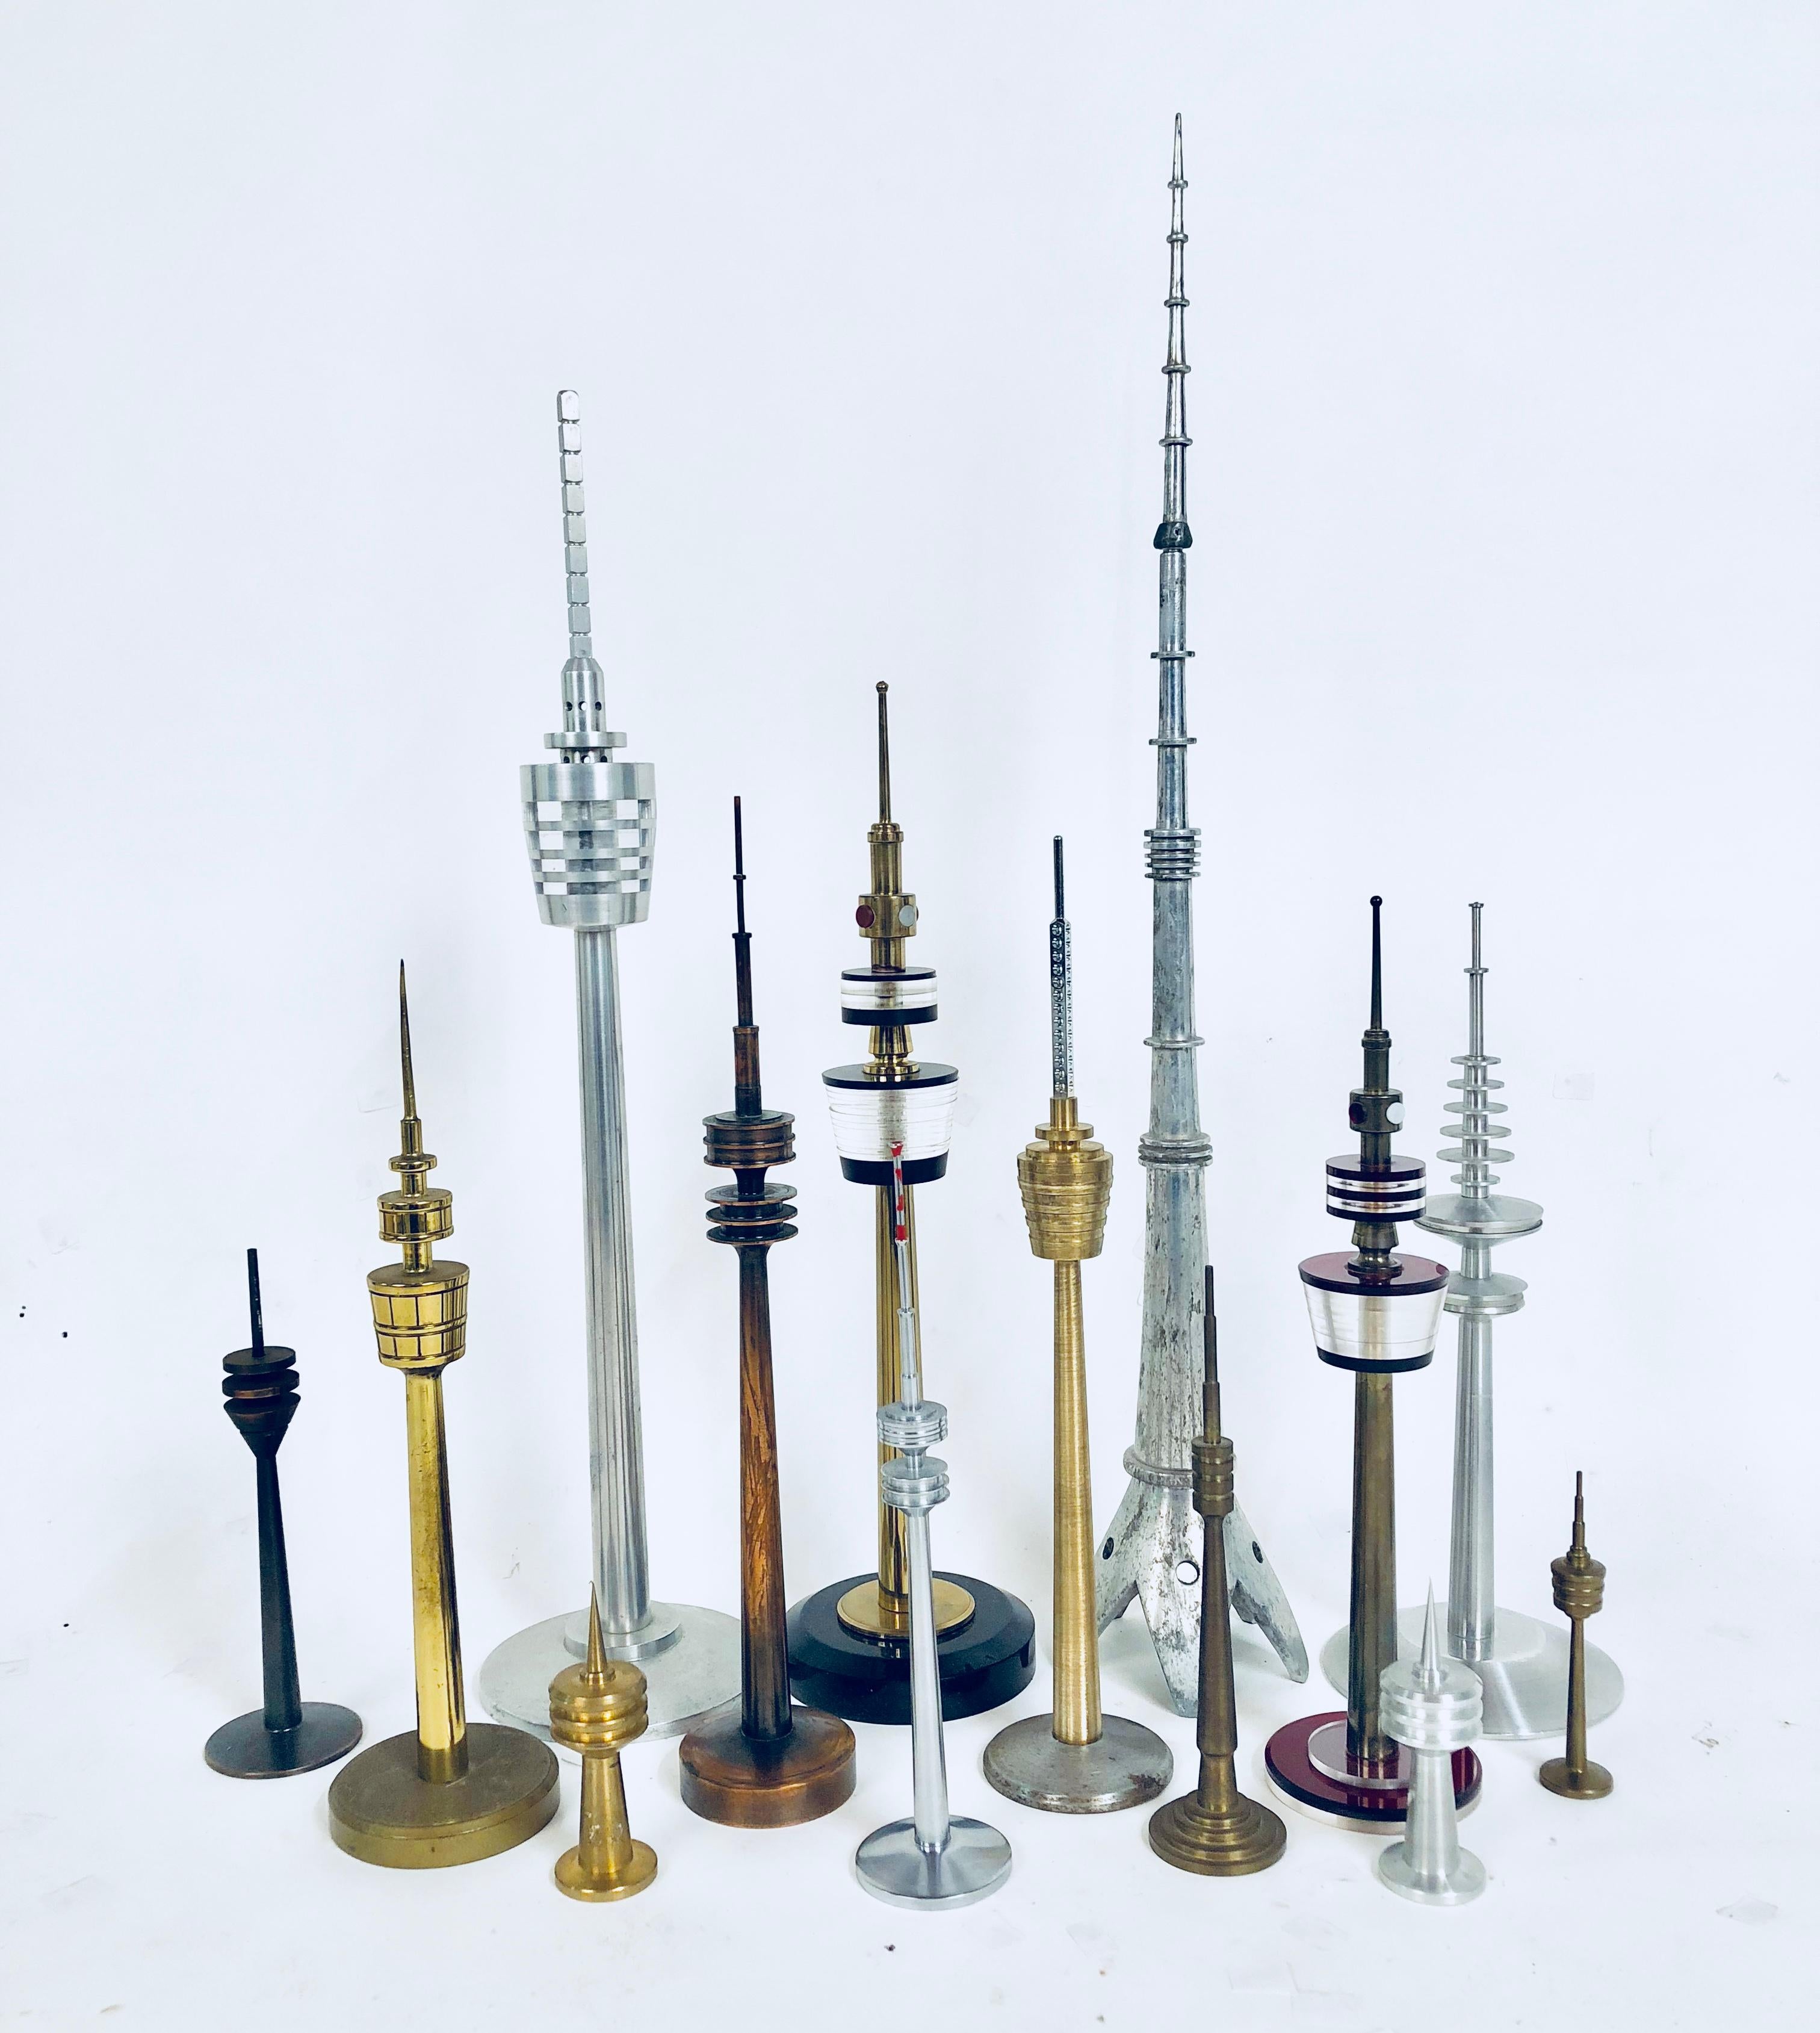 Rare and unusual collection of vintage Space Age looking TV tower models circa 1950-1970 from Europe. Made of steel, brass, spun aluminum and Lucite. Stunning conversational pieces. Great for above the mantel. Sizes range form 3.5 inches to 20.25